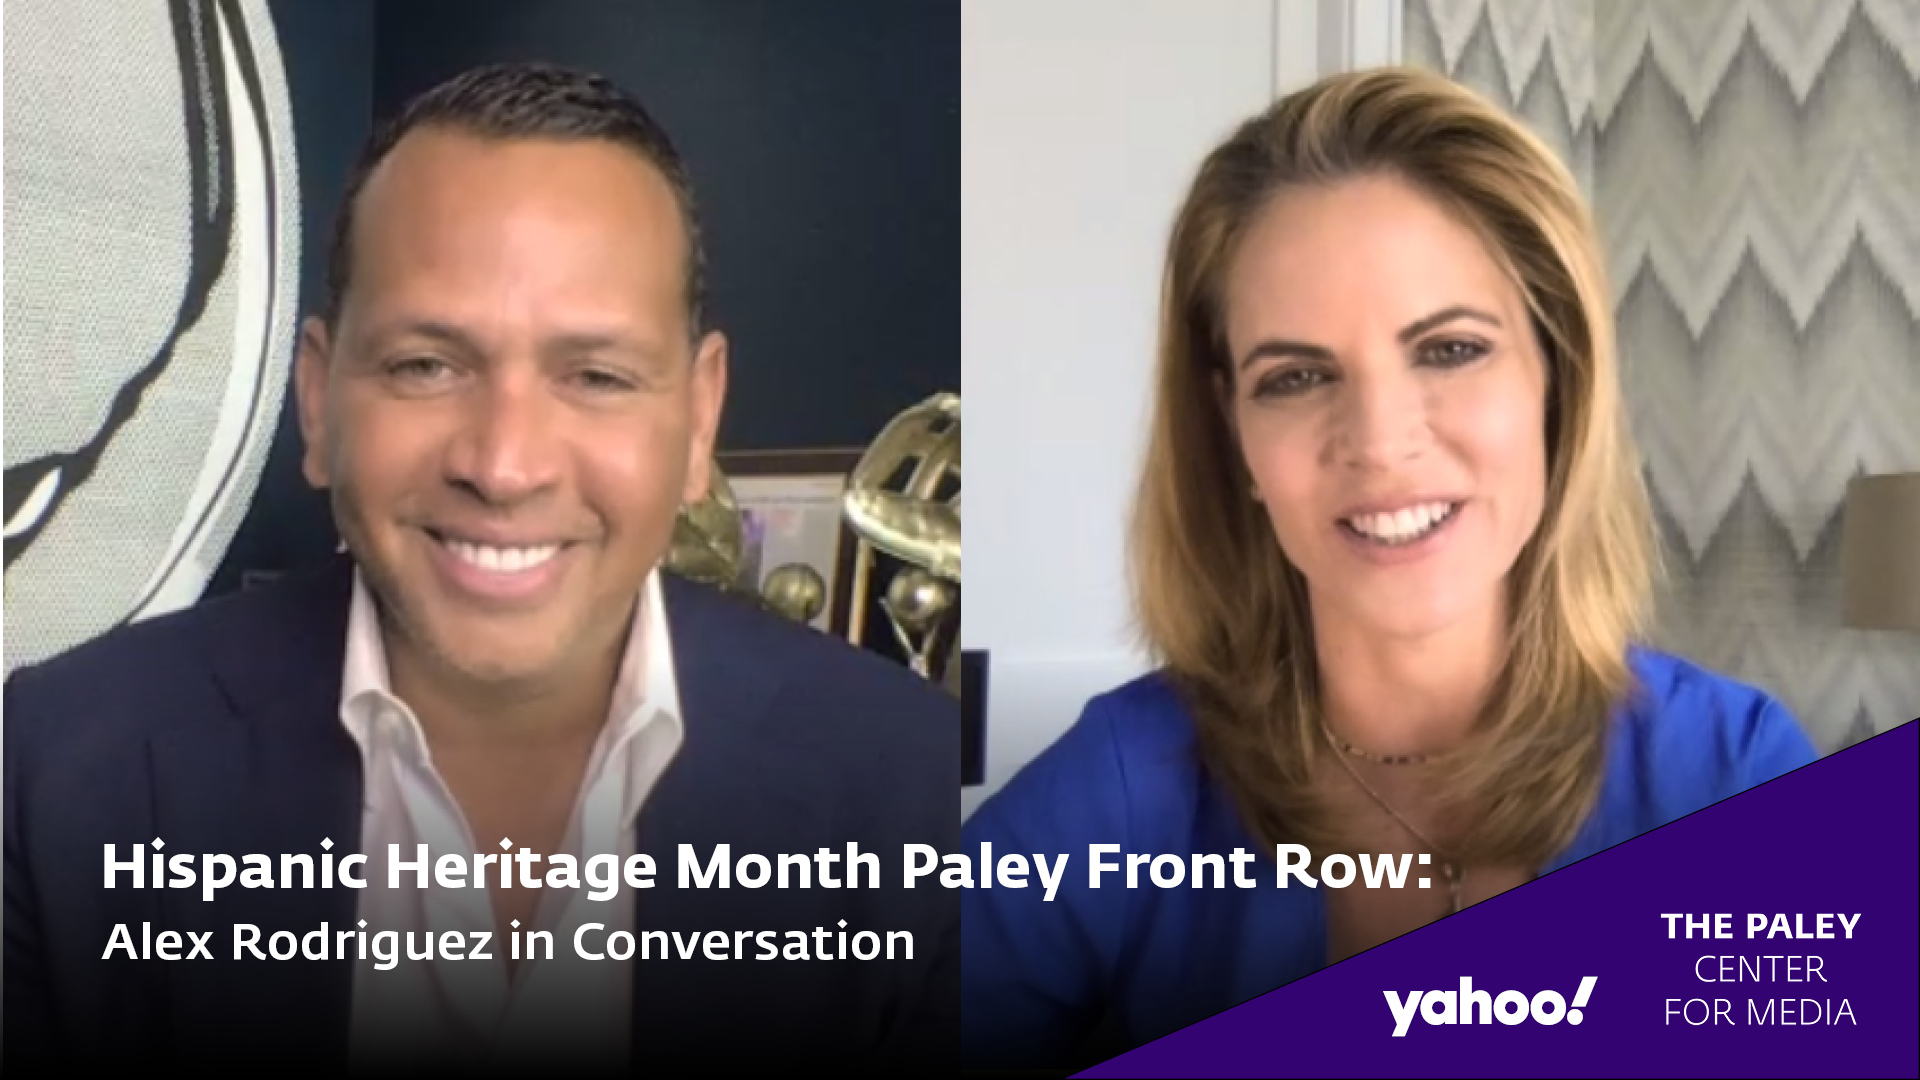 Hispanic Heritage Month: Alex Rodriguez in Conversation at Paley Front Row 2020